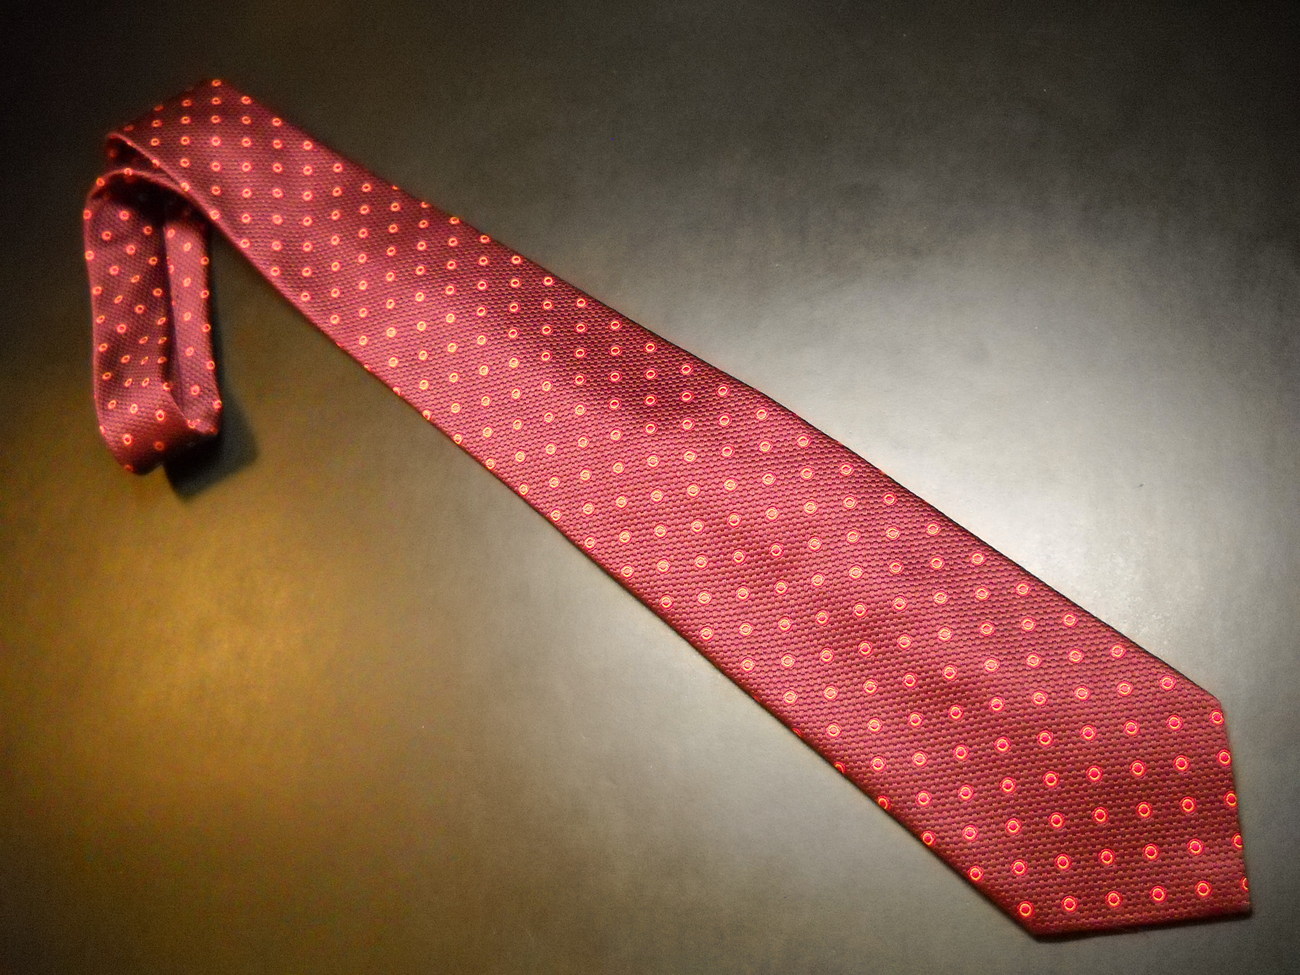 Jos A Bank Neck Tie Burgundy Reds Silk Hand Made in Italy New Unused Retail Tag - $13.99